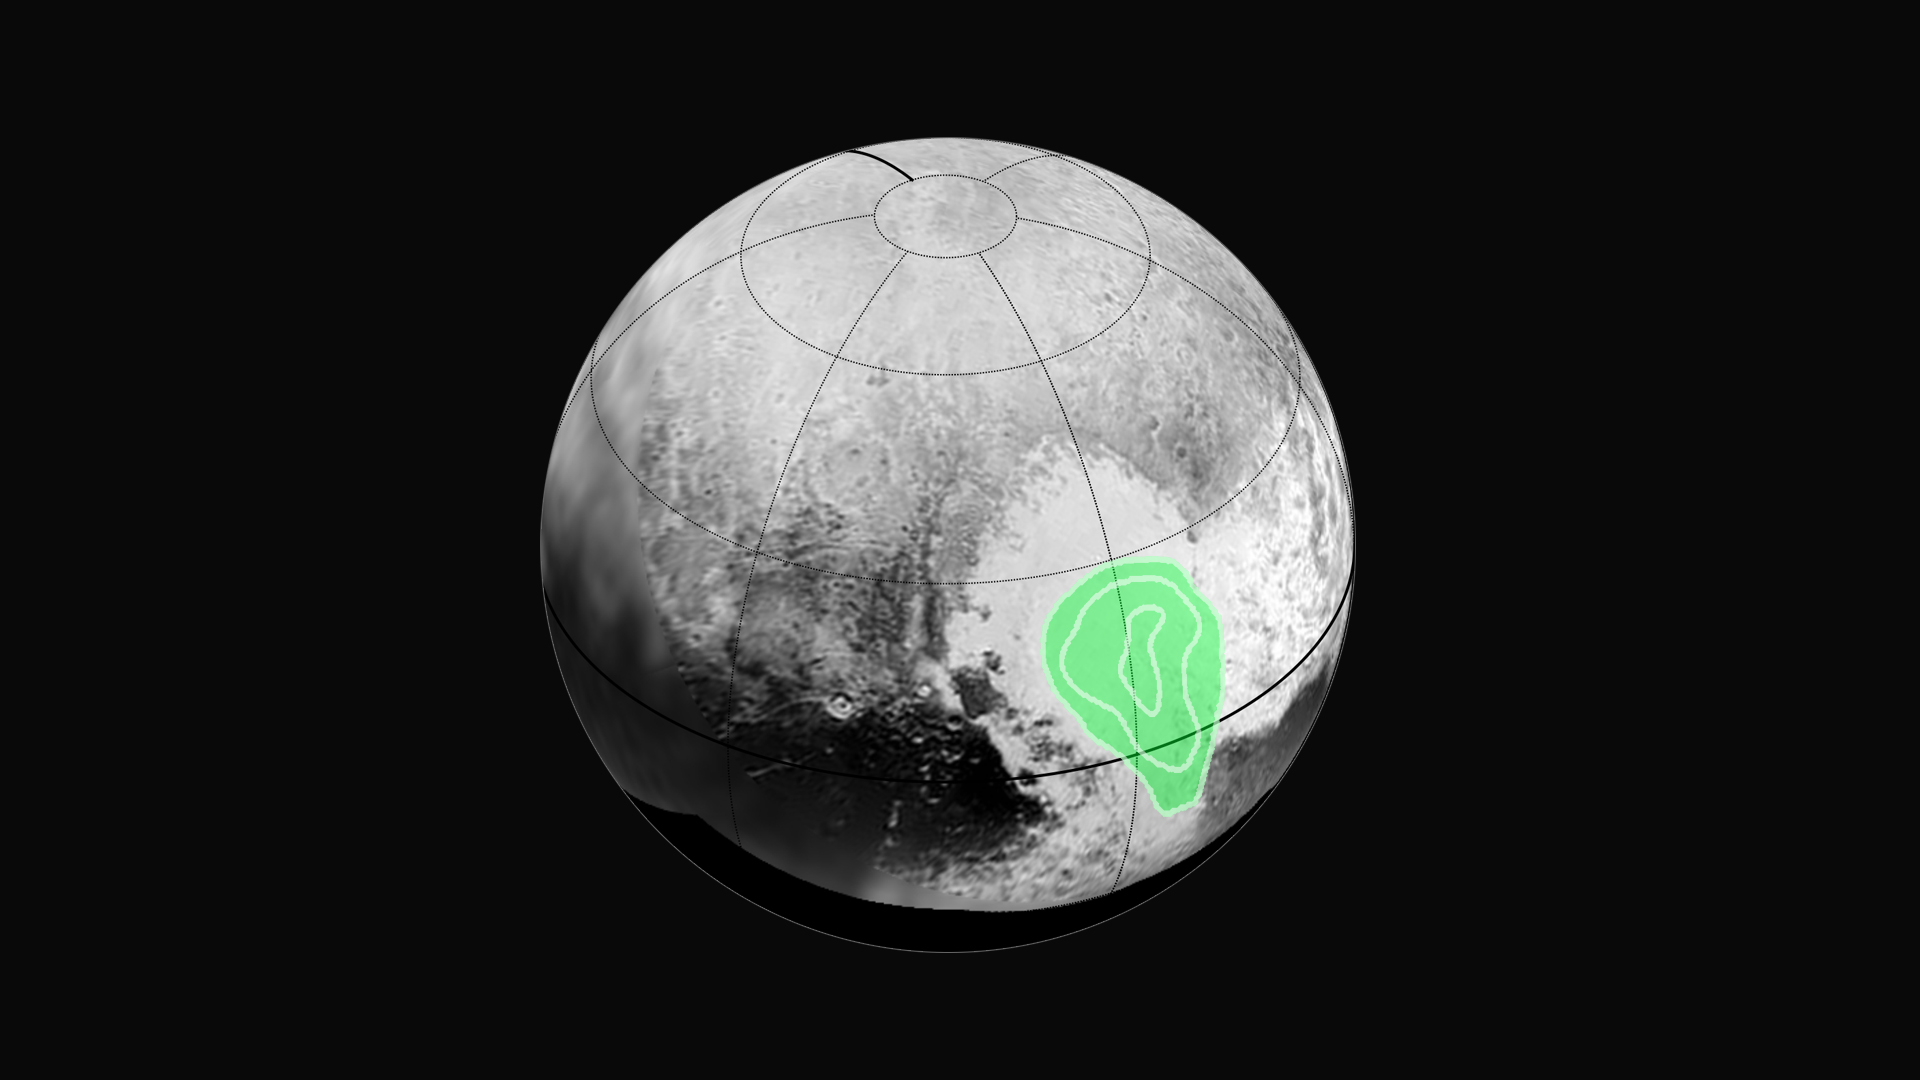 Scientists have found evidence of frozen carbon monoxide in Pluto’s 'Heart' region, now known as Tombaugh Regio. The concentration of carbon monoxide increases towards the center of the “bull’s eye” in this image. 